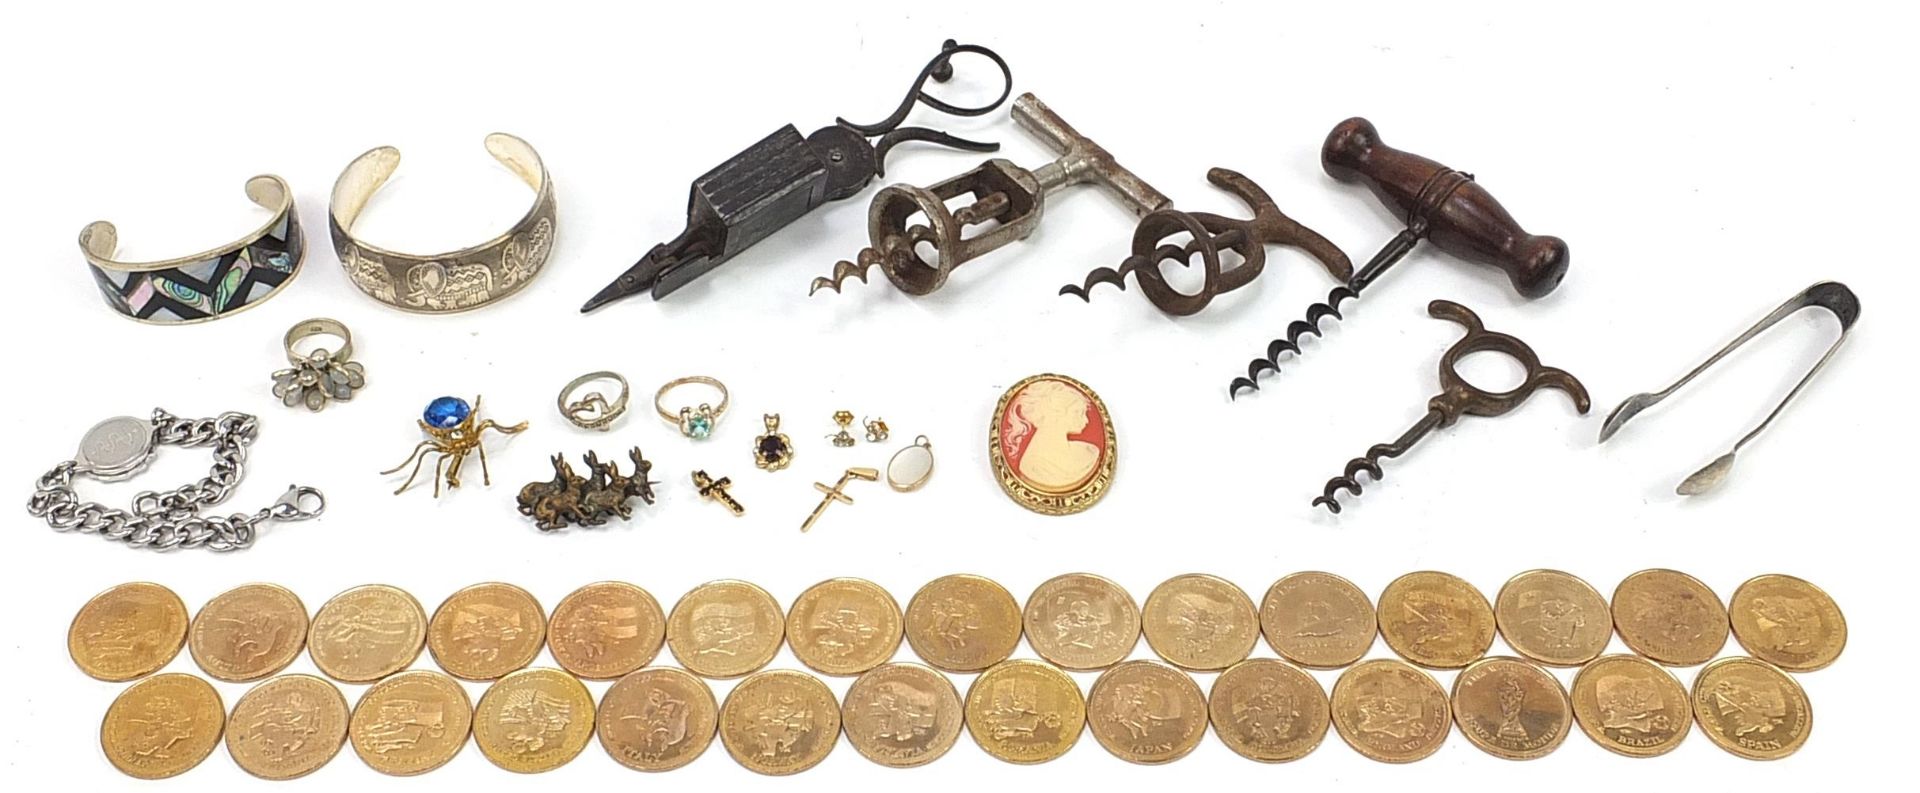 Objects including antique corkscrews, football '98 World Cup tokens and costume jewellery